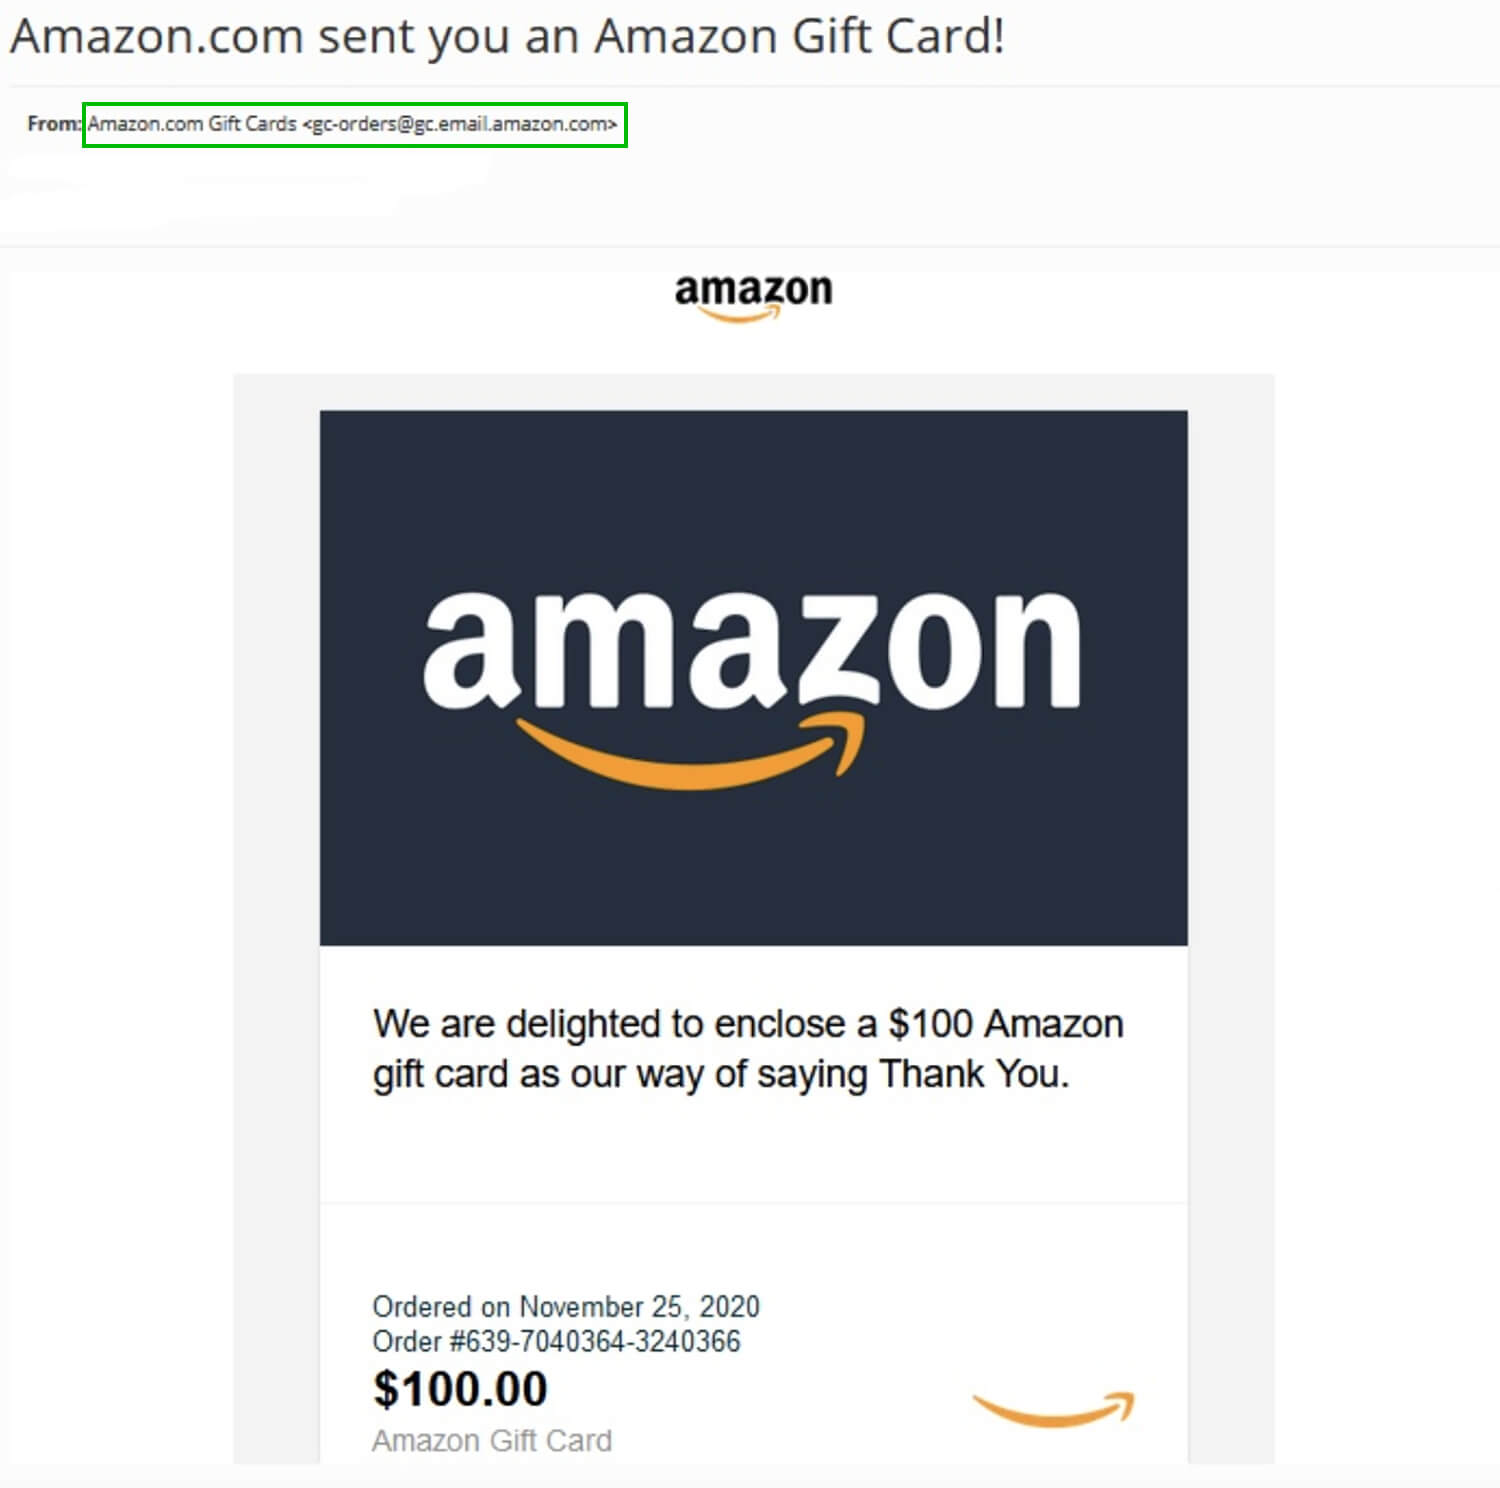 Amazon gift card spam email